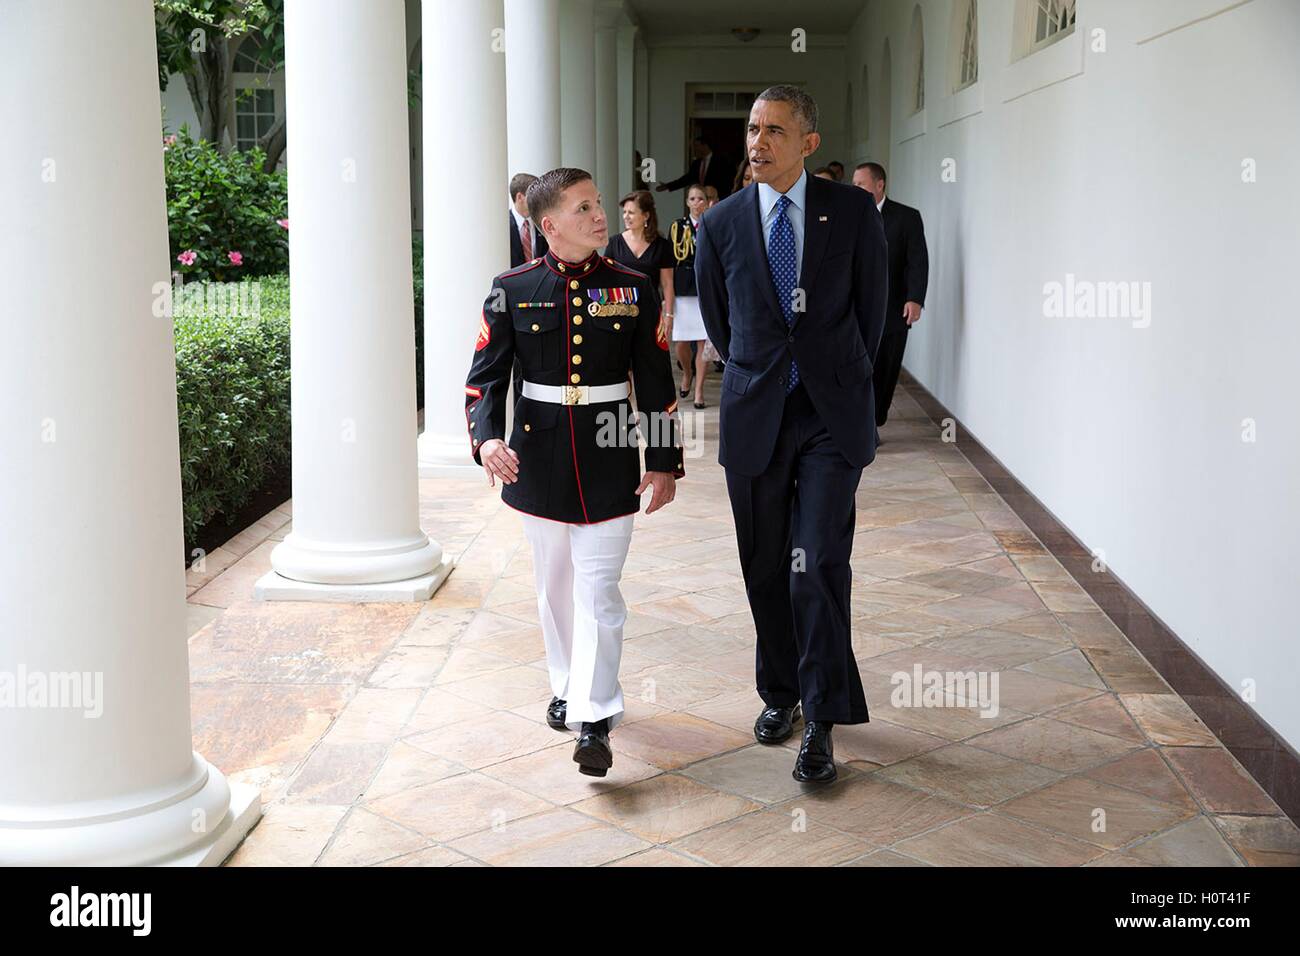 U.S. President Barack Obama walks on the Colonnade with U.S. Marine William Kyle Carpenter en route to a Medal of Honor Ceremony June 19, 2014 in Washington, DC. Stock Photo